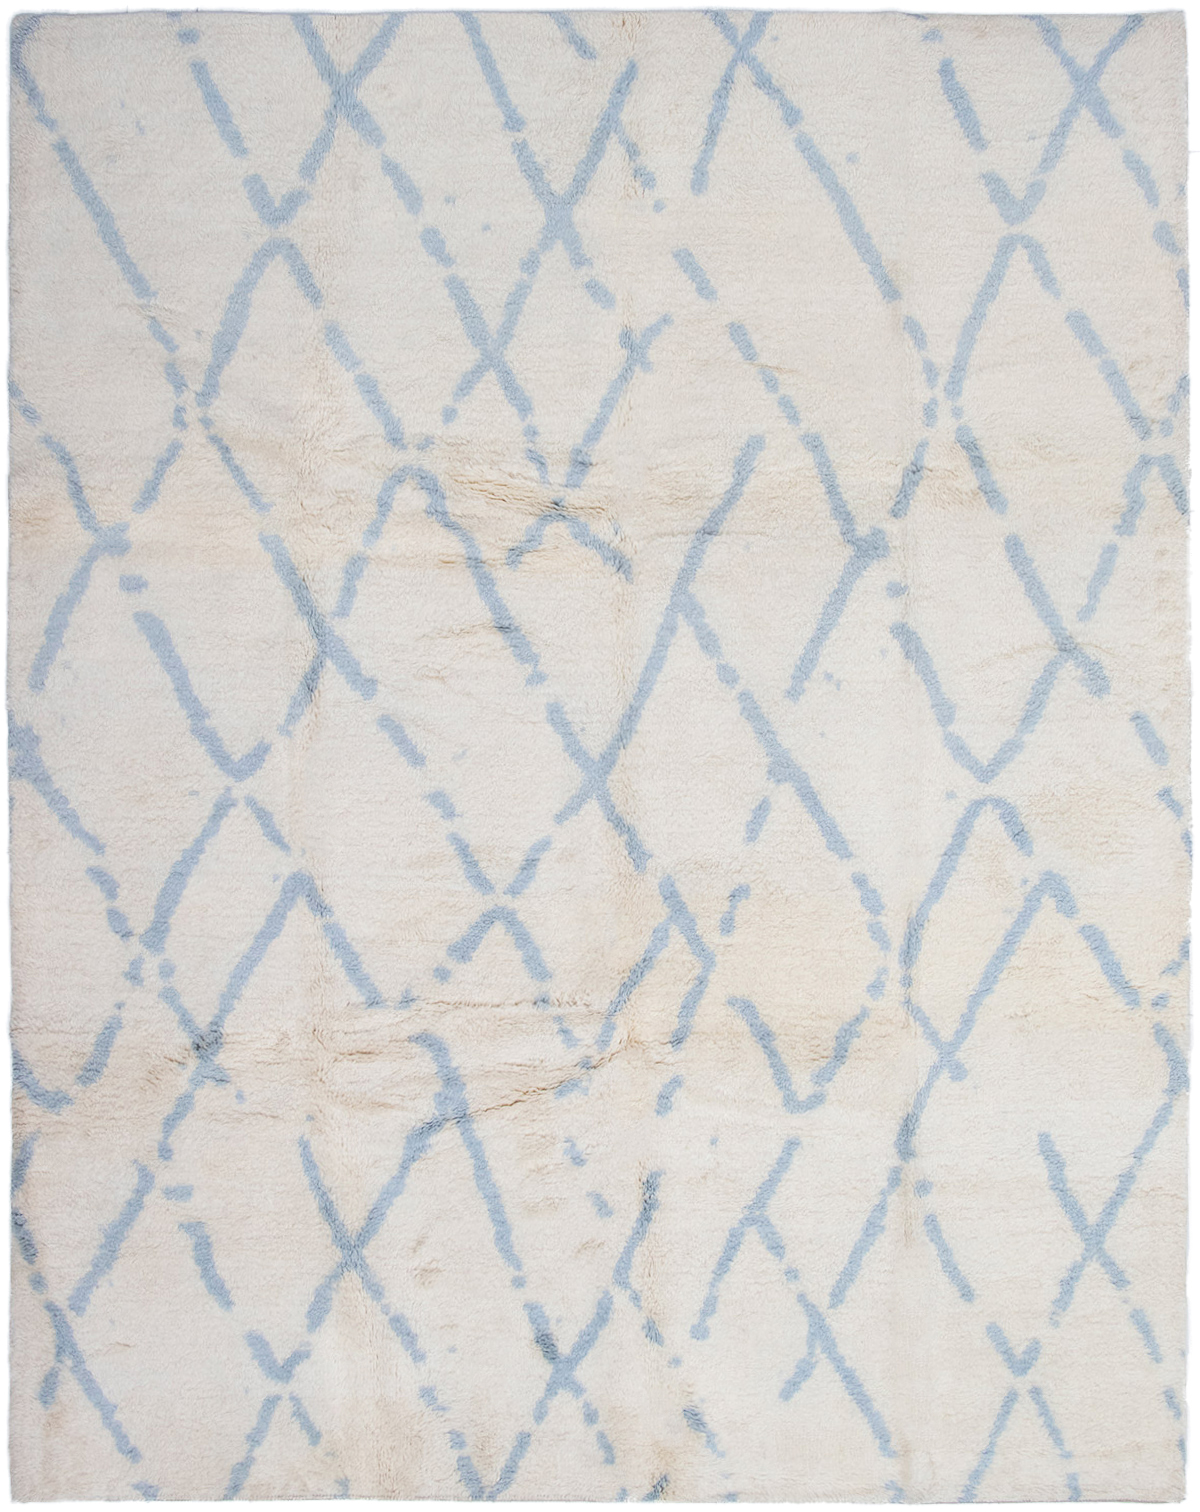 Hand-knotted Arlequin Cream Wool Rug 9'4" x 12'0" Size: 9'4" x 12'0"  